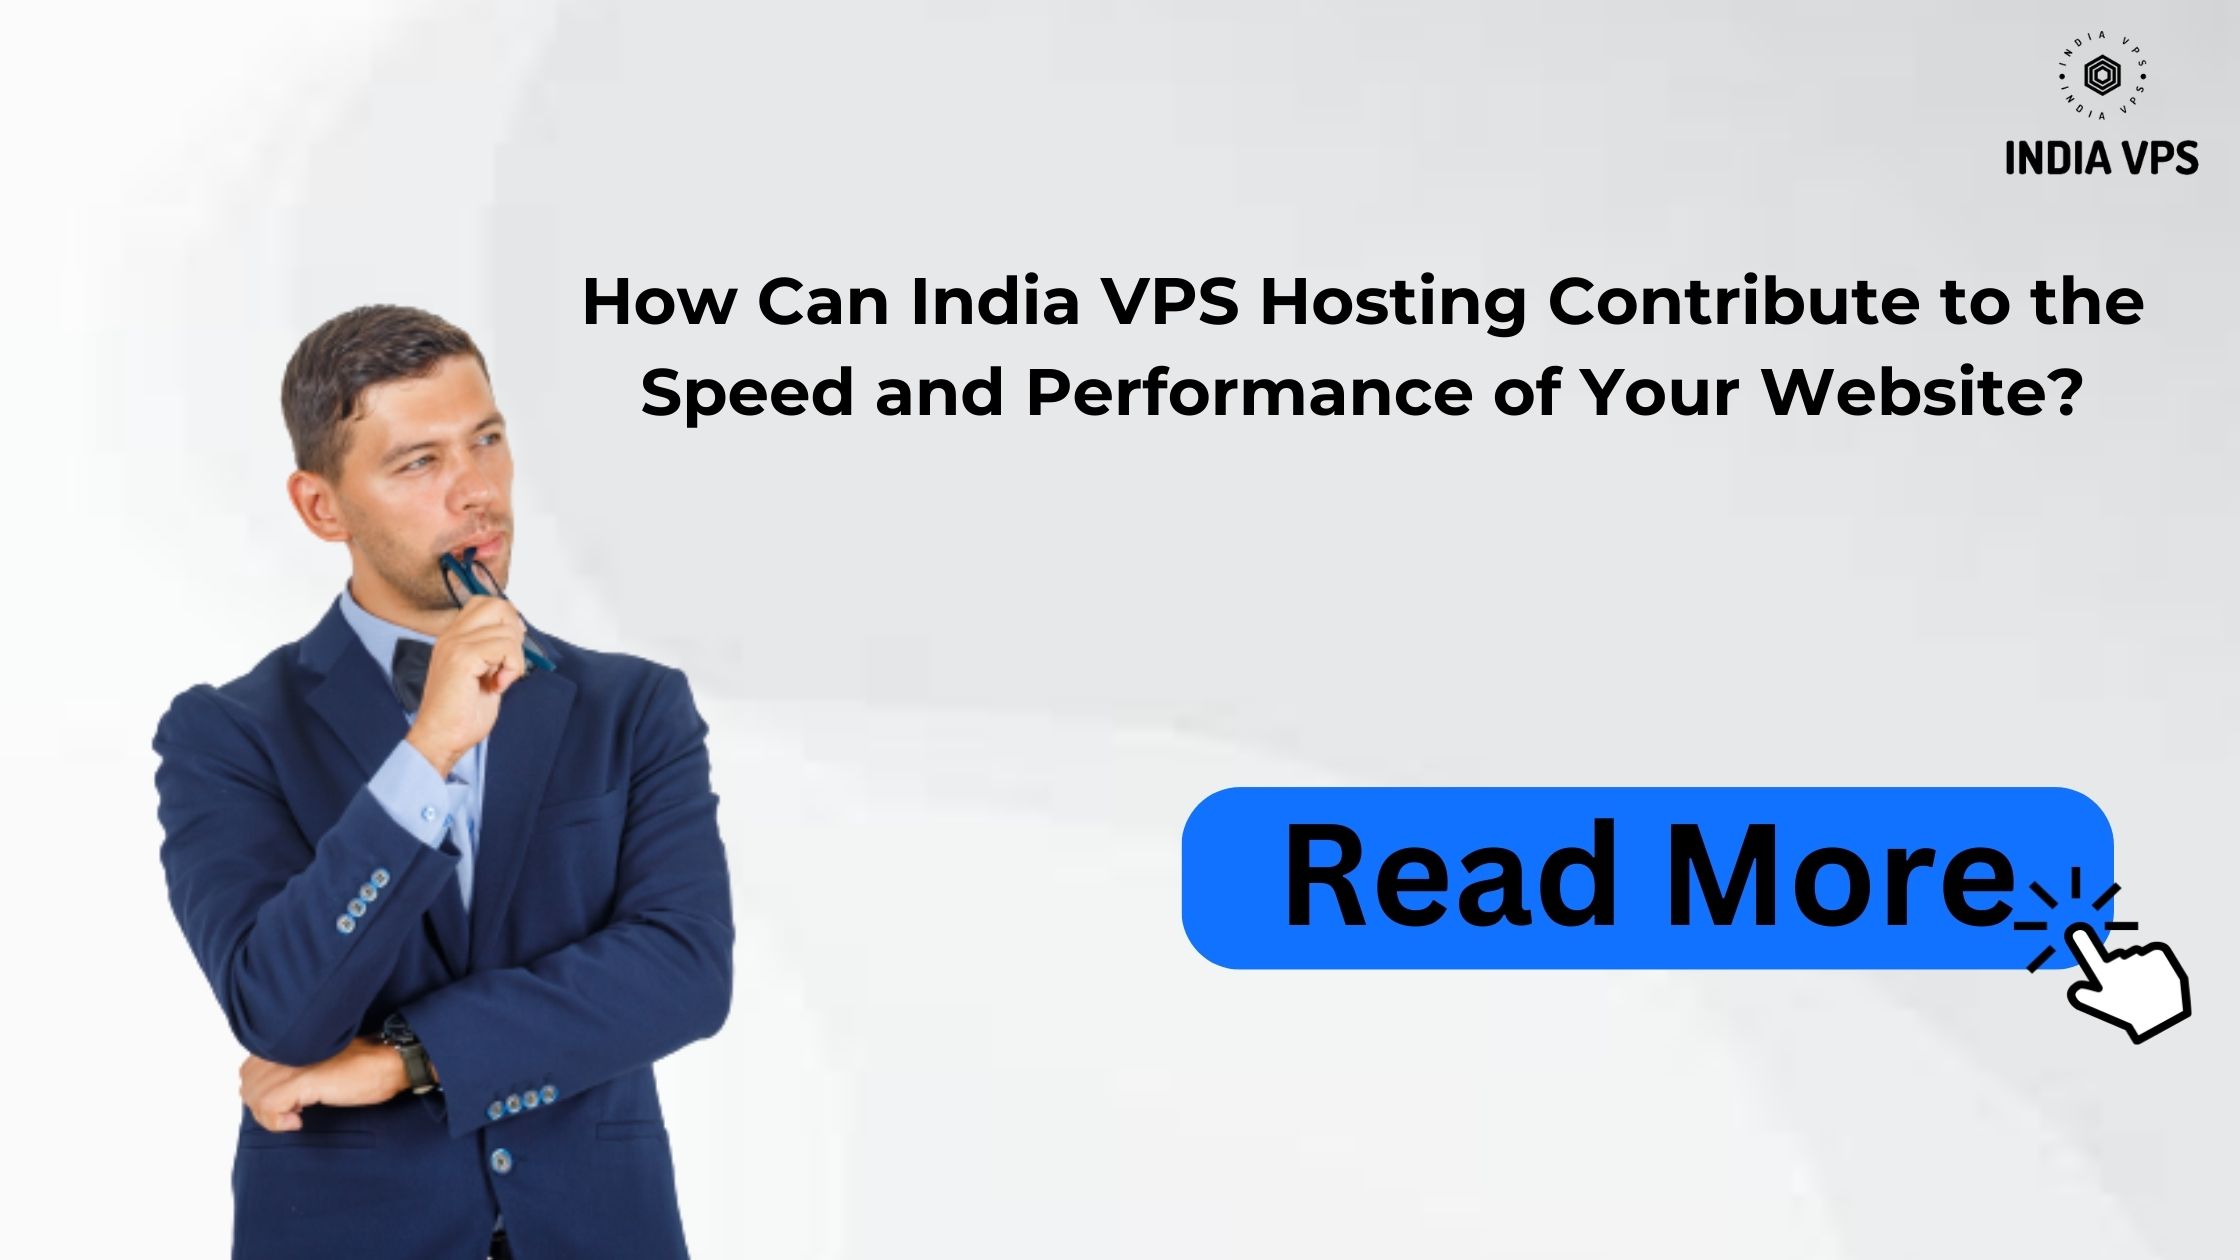 How Can India VPS Hosting Contribute to the Speed and Performance of Your Website?